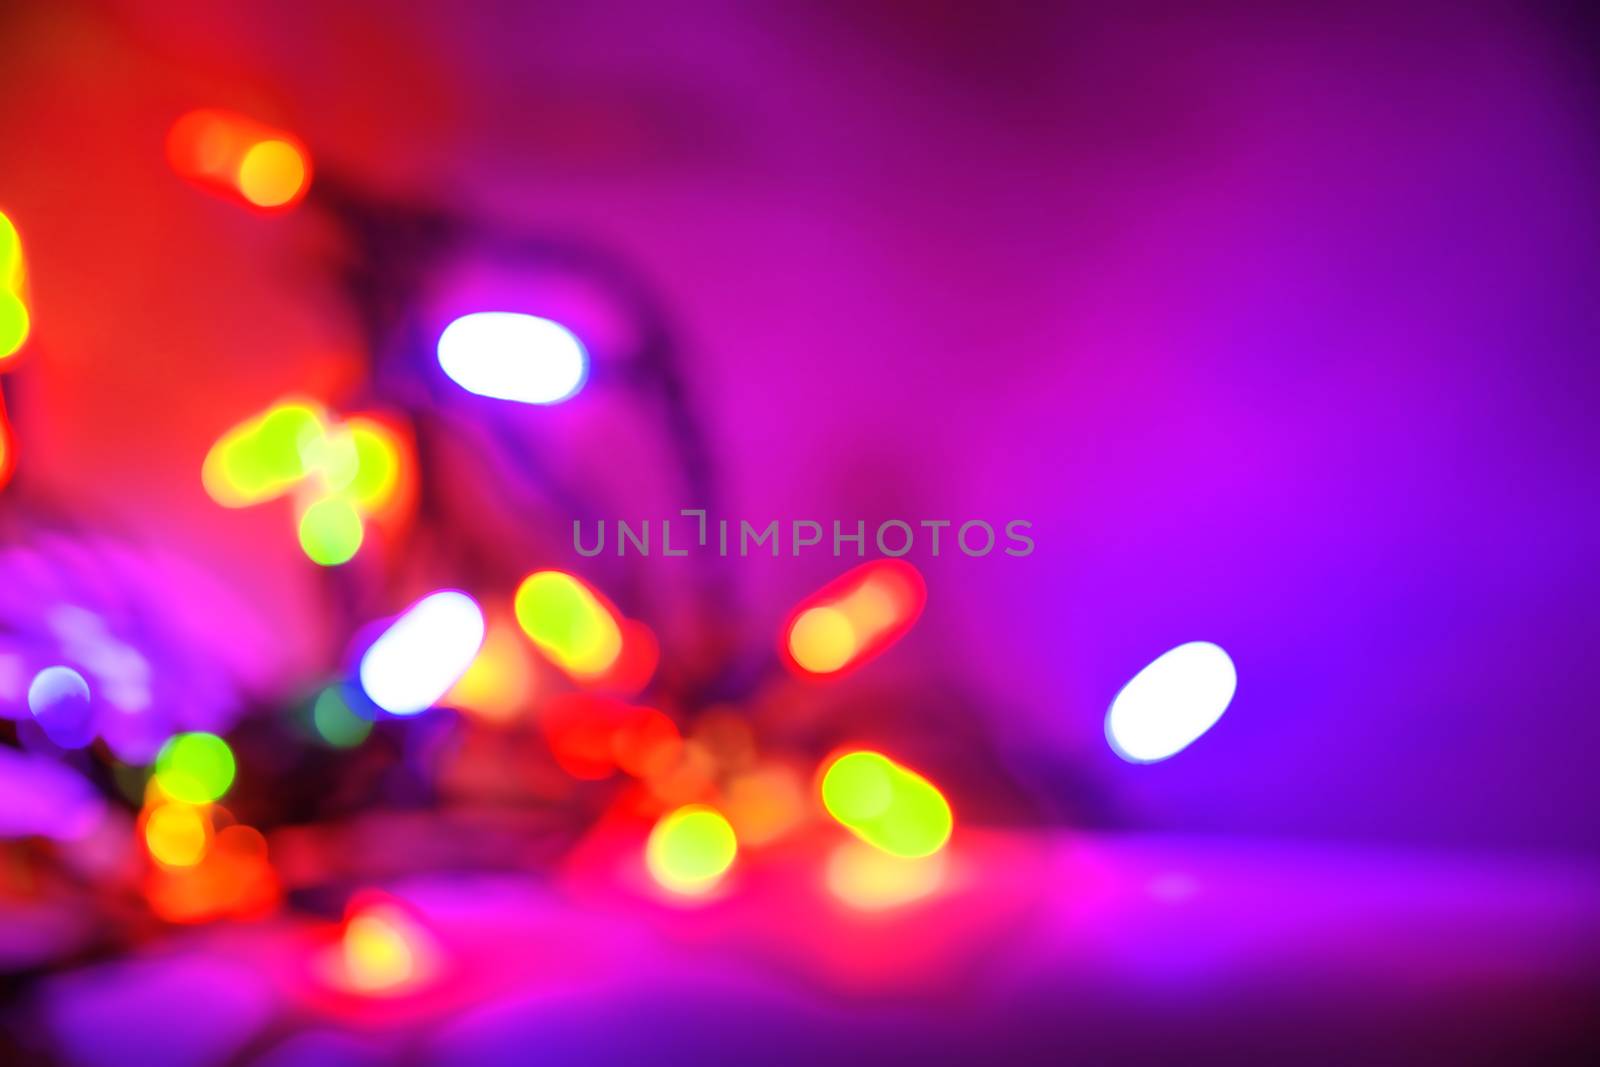 Fun out of focus Christmas light background with great colors.